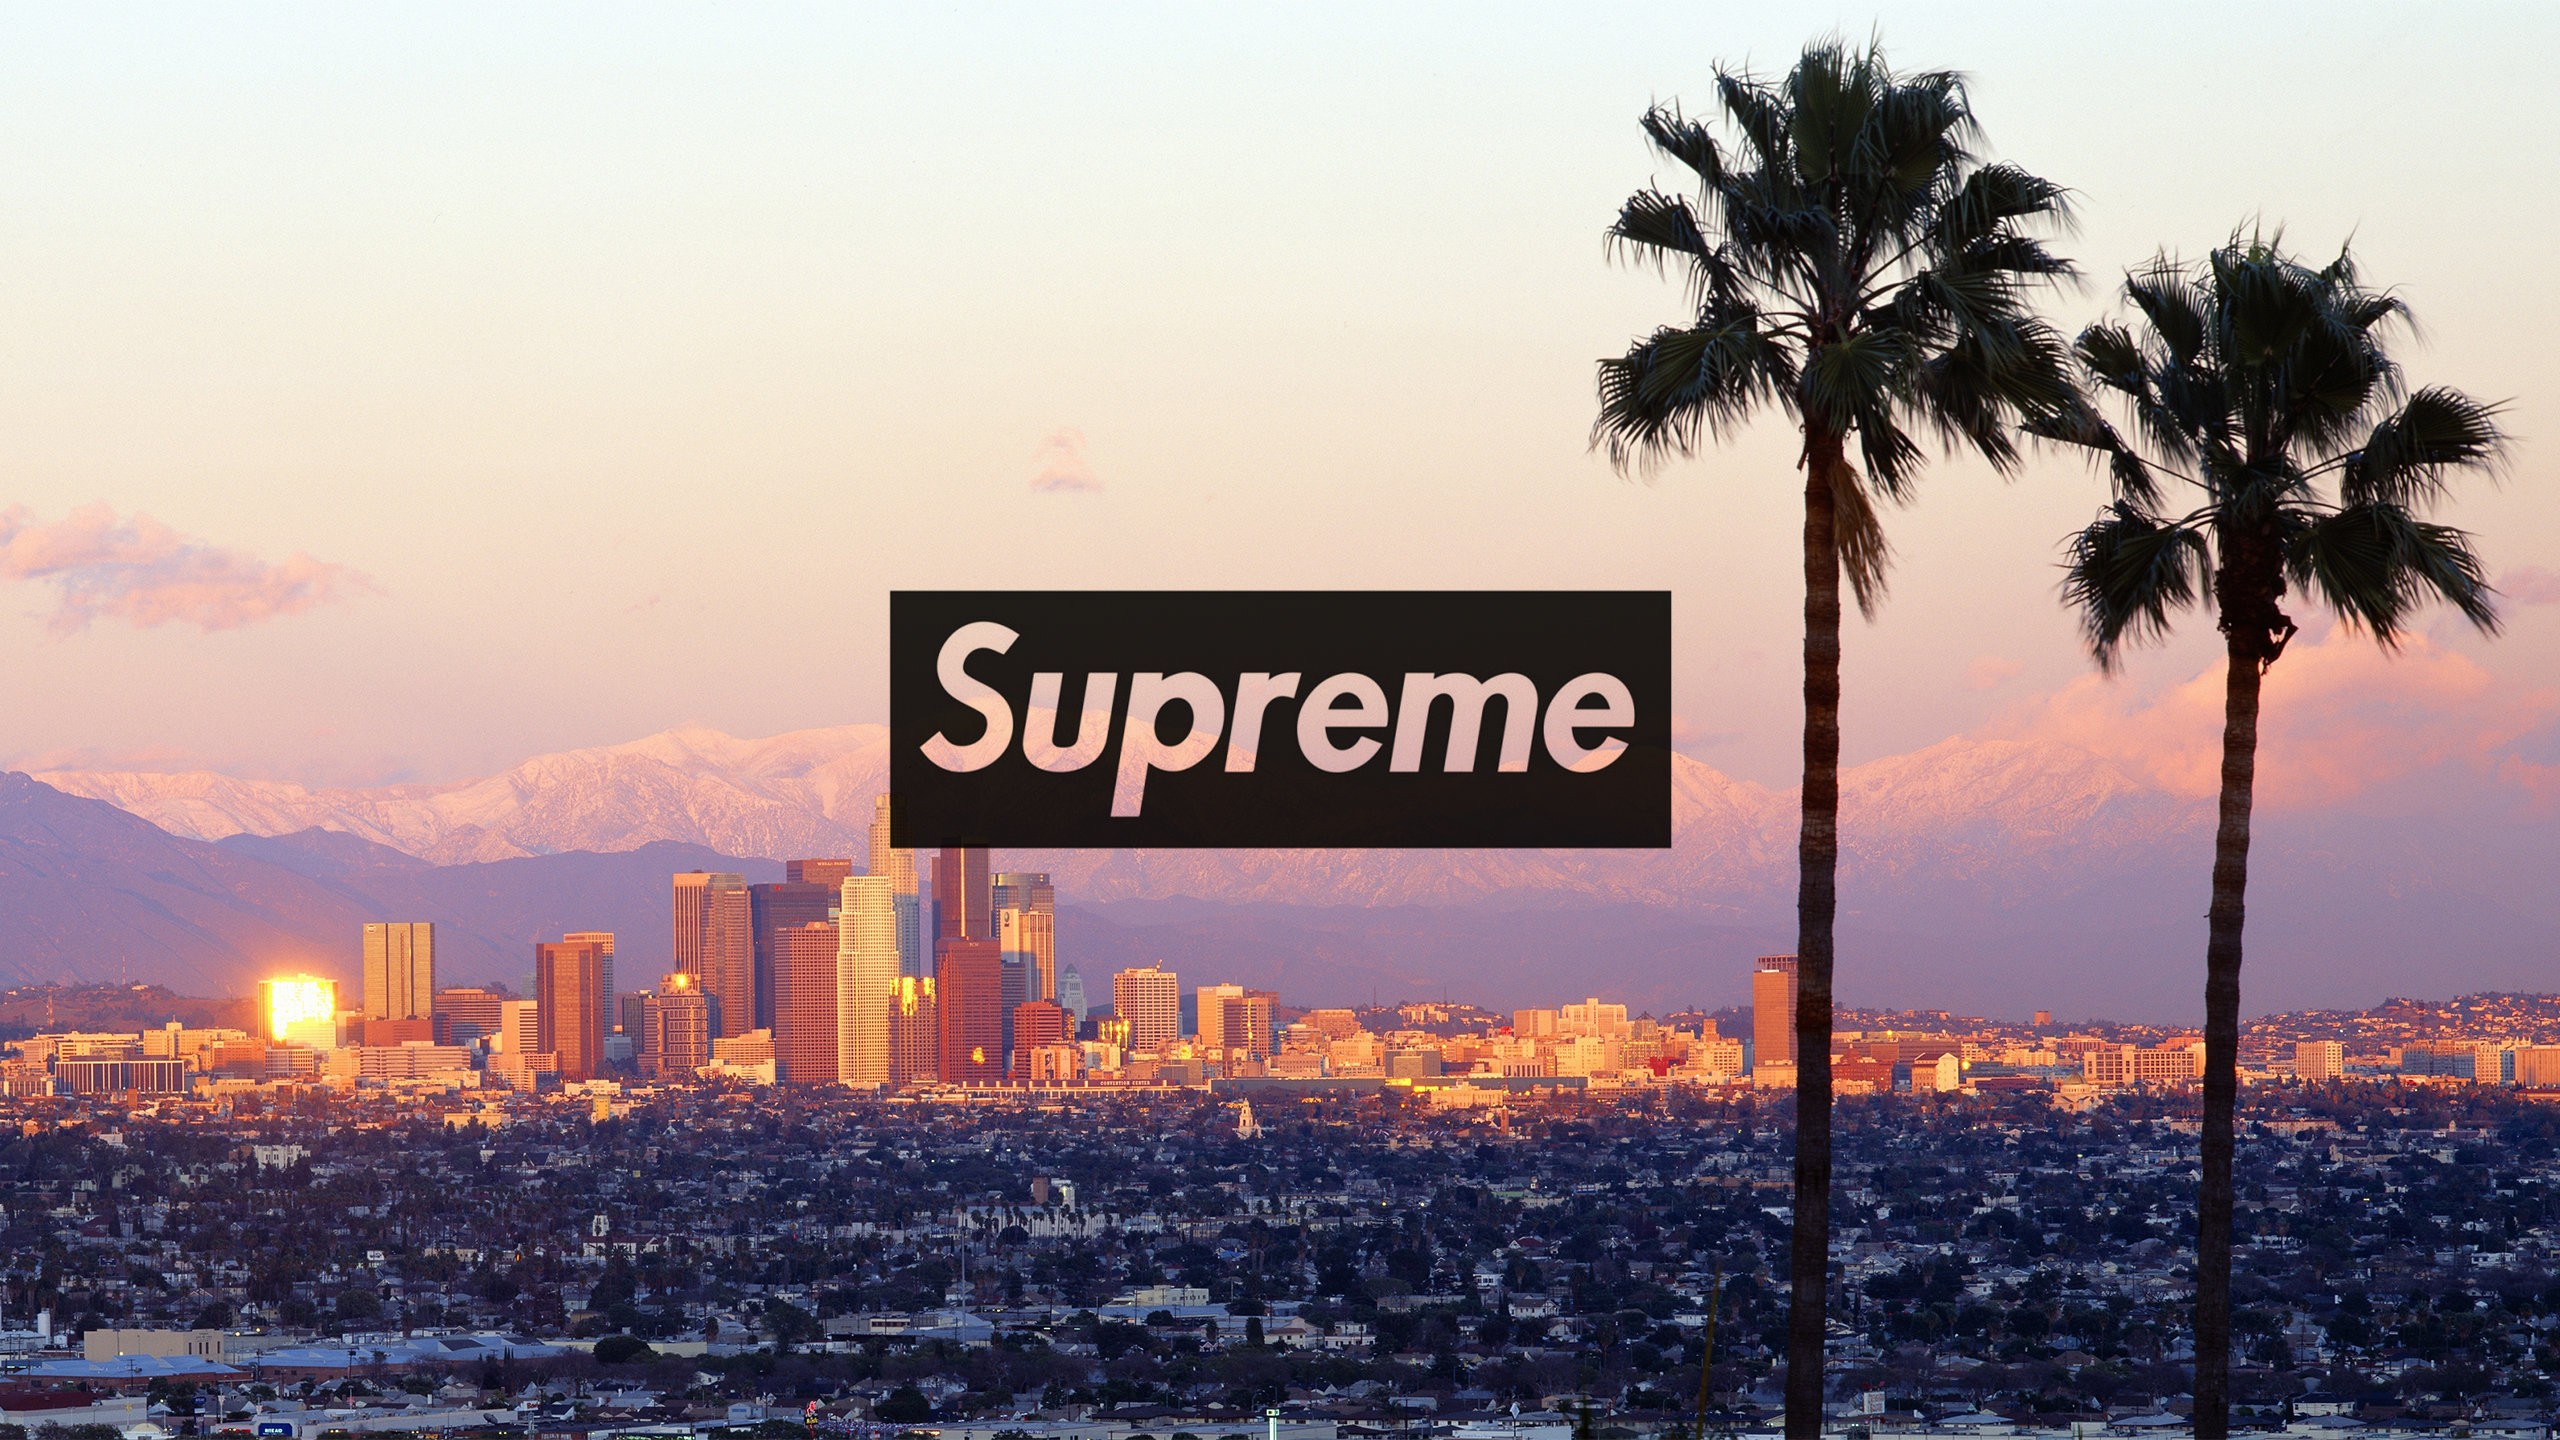 View Supreme Cool Eshay Wallpaper Background